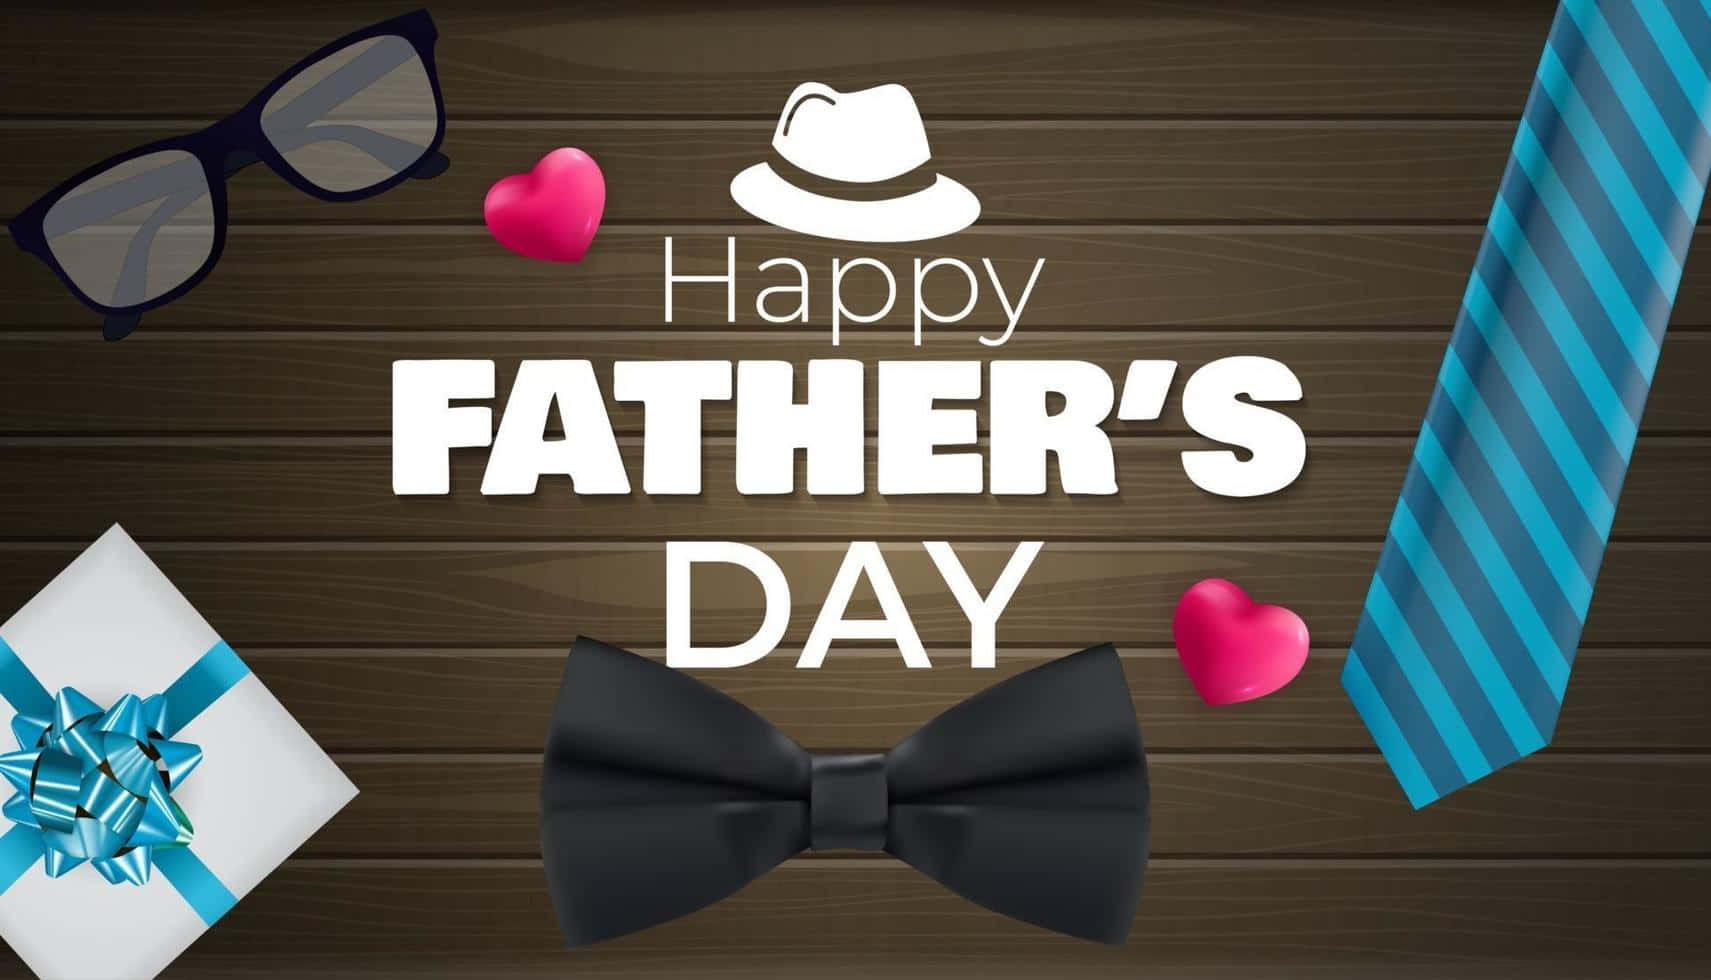 Celebrate Father's Day with Love and Appreciation